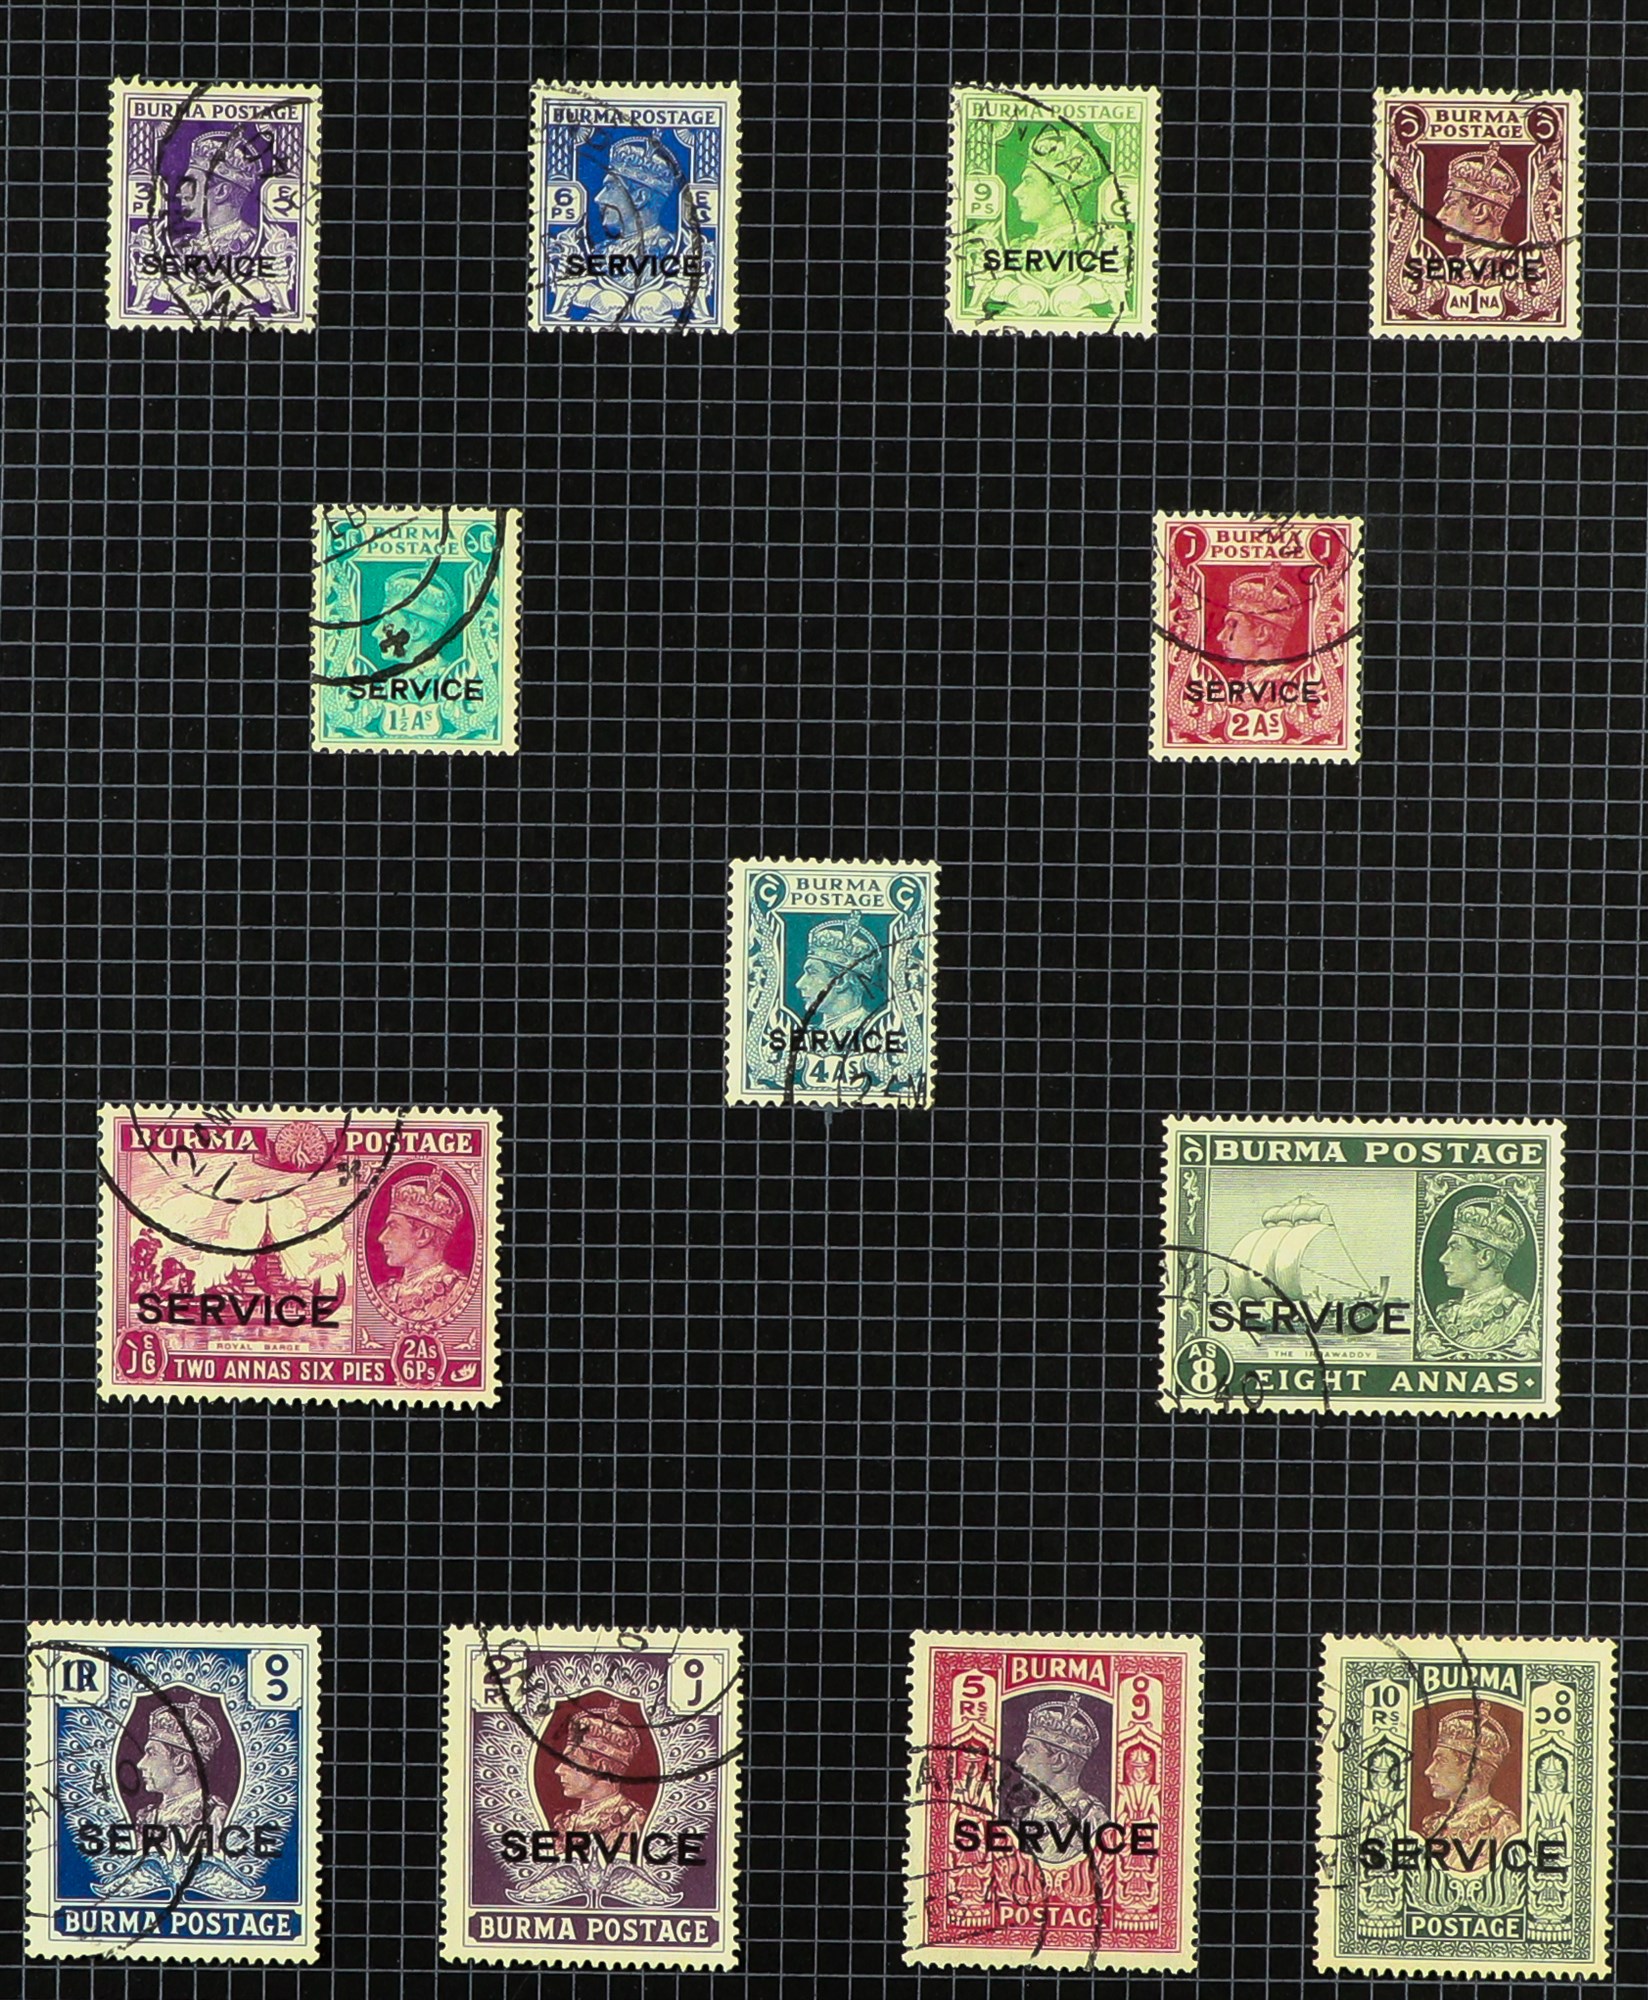 BURMA 1937-1947 USED COLLECTION on pages, includes 1937 opts set to 5r, 1938-40 set, 1946 set, - Image 4 of 4